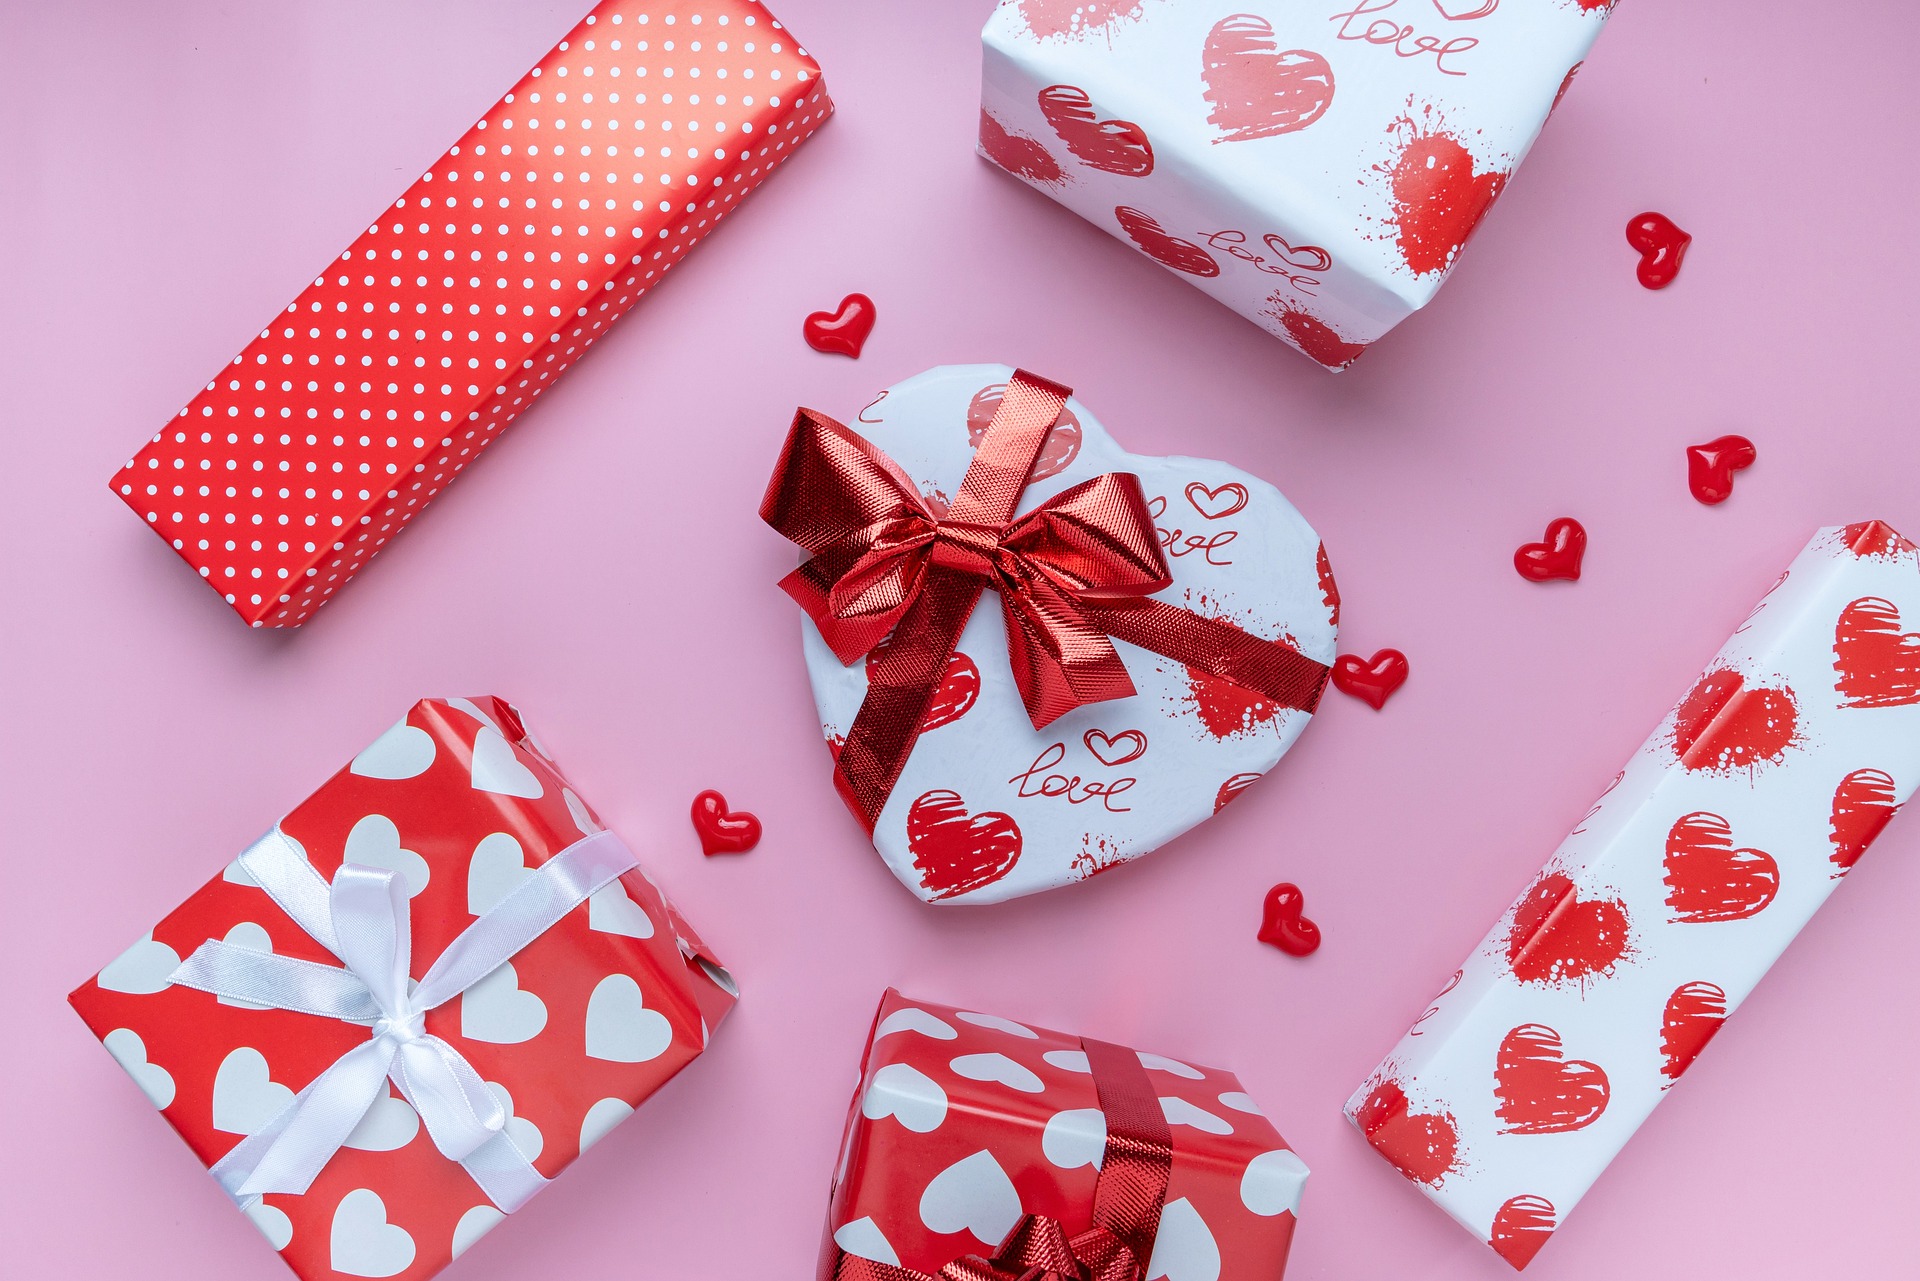 4 Iconic Valentine’s Day campaigns that stole our hearts